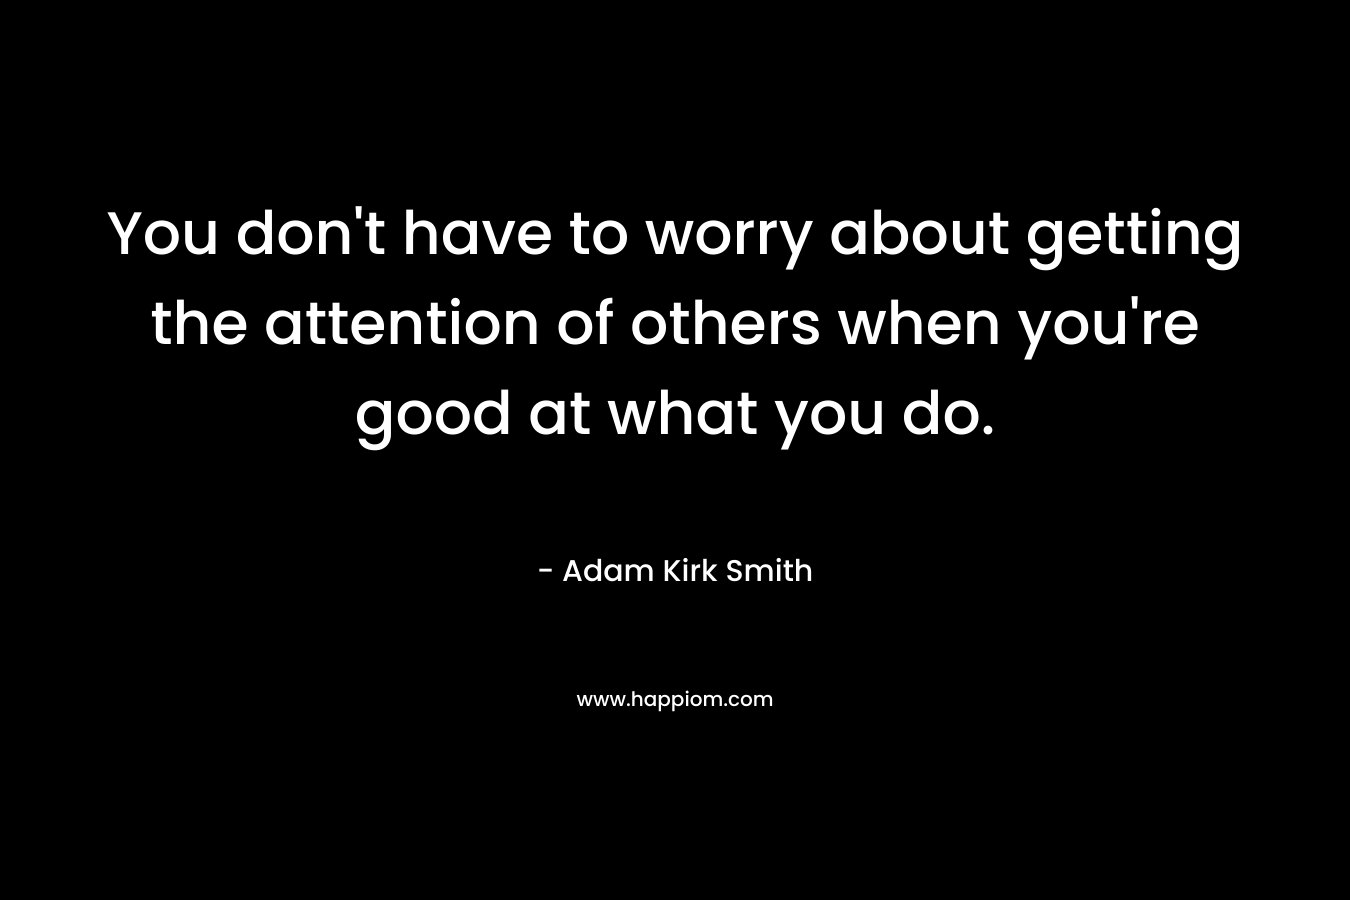 You don’t have to worry about getting the attention of others when you’re good at what you do. – Adam Kirk Smith